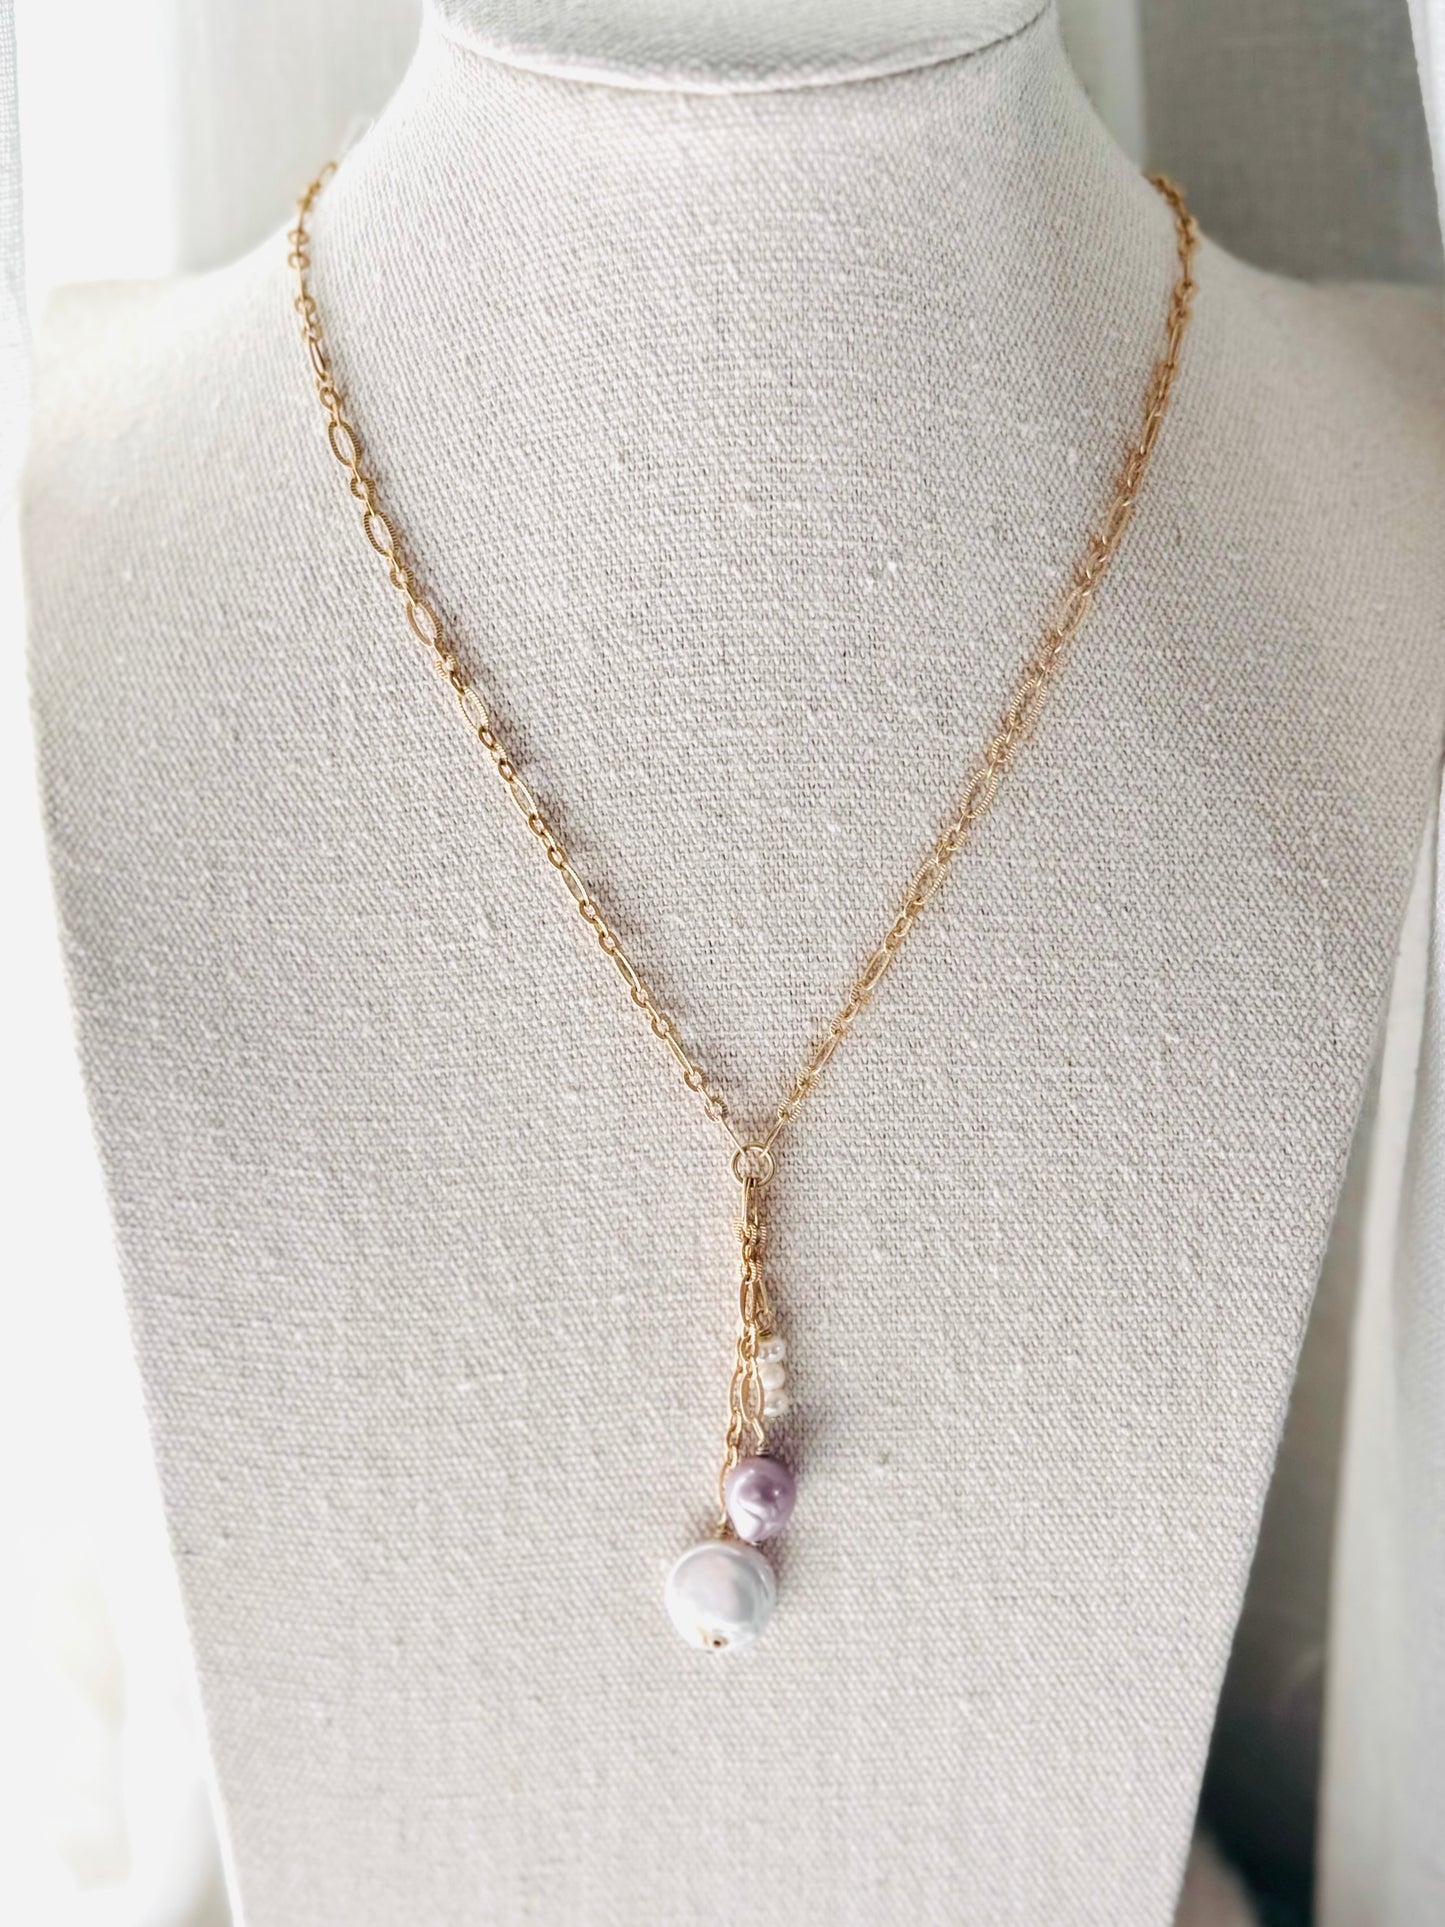 Freshwater Pearl + Matte Gold Textured Necklace